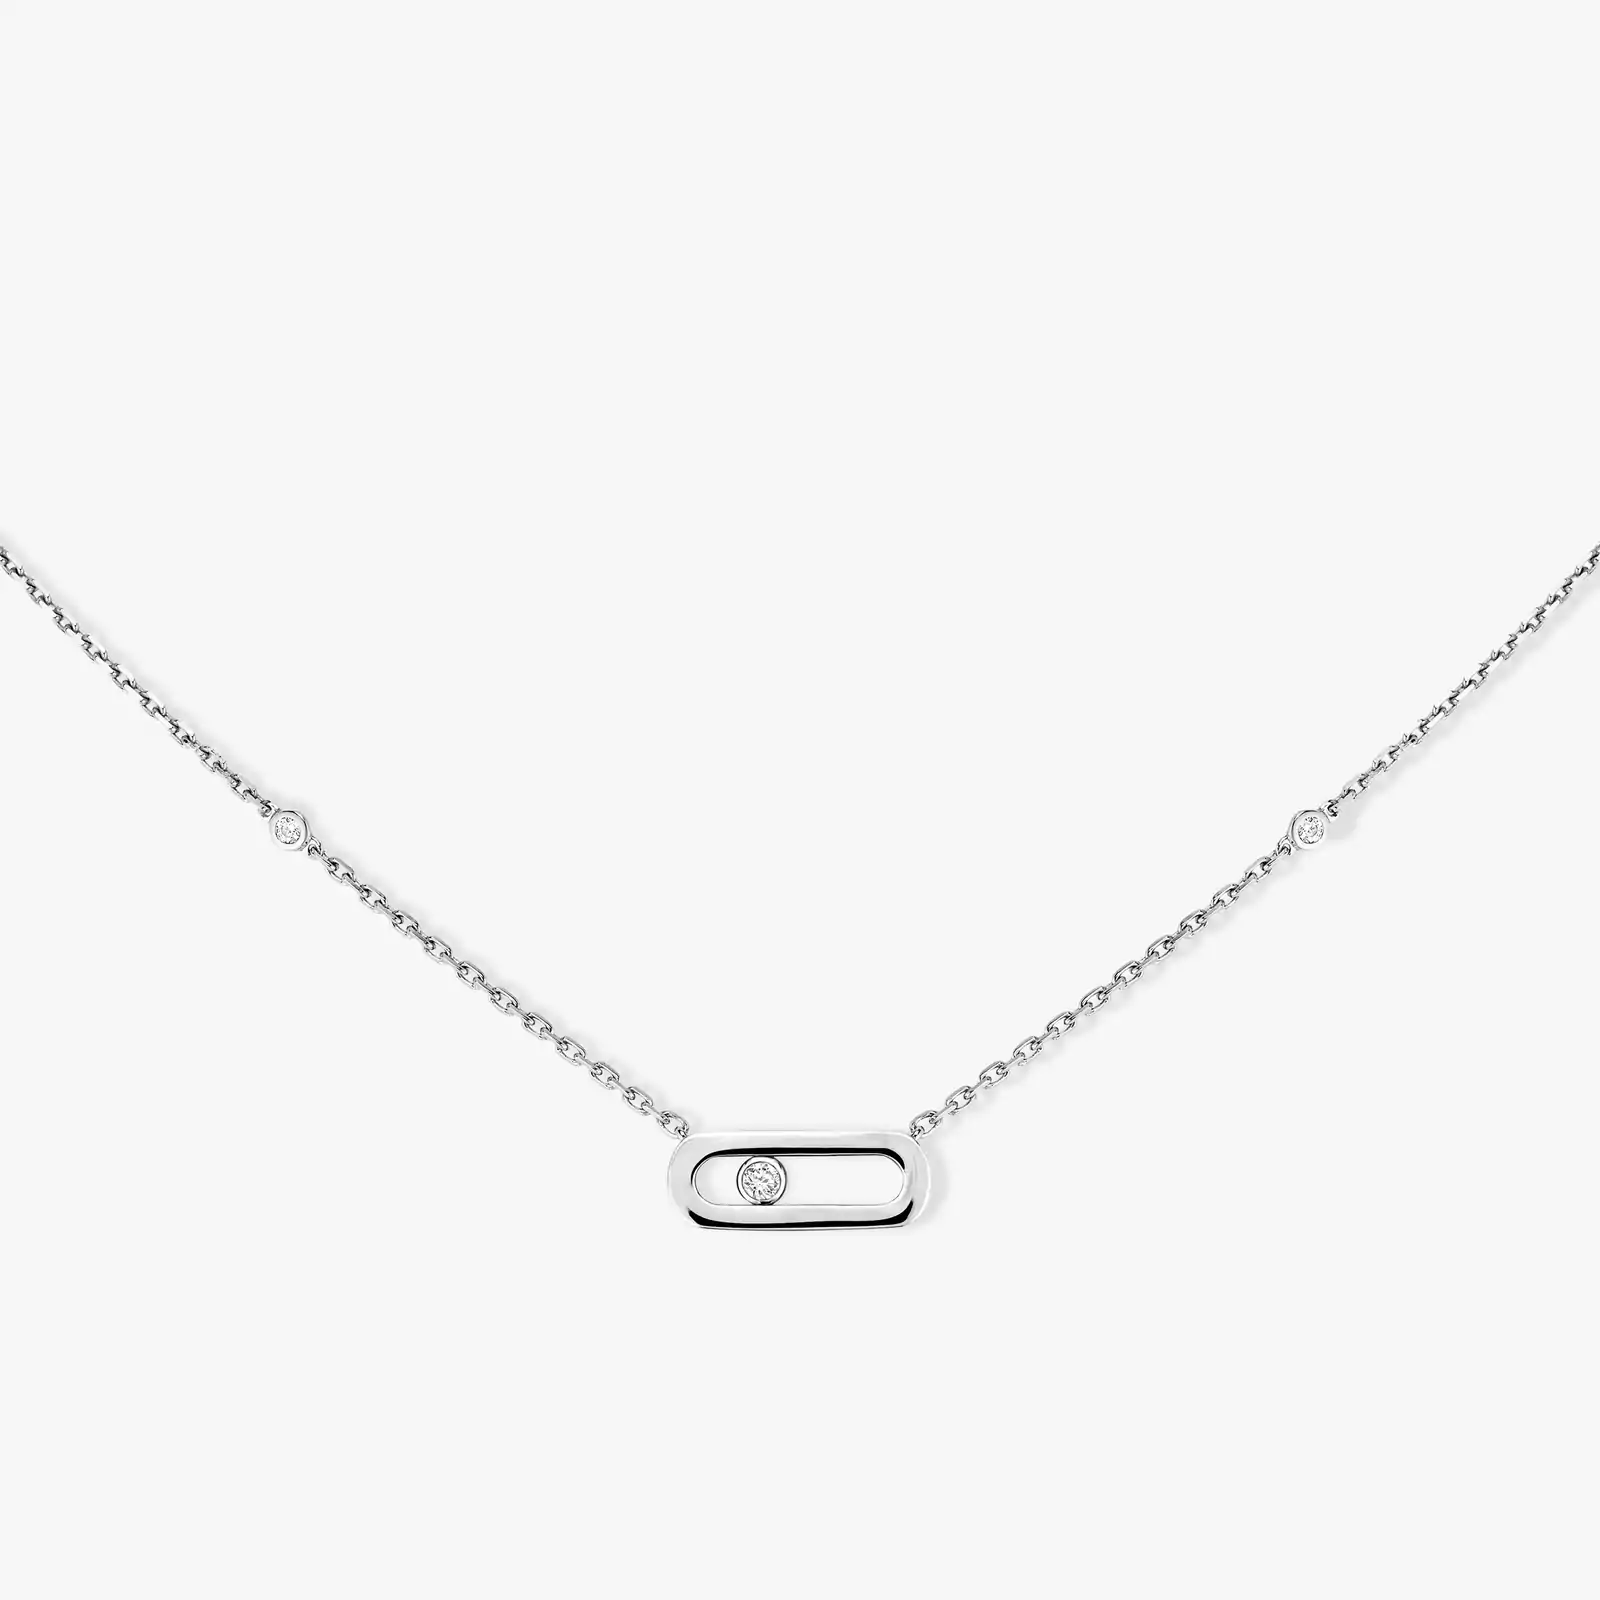 Gold Move Uno White Gold For Her Diamond Necklace 10053-WG